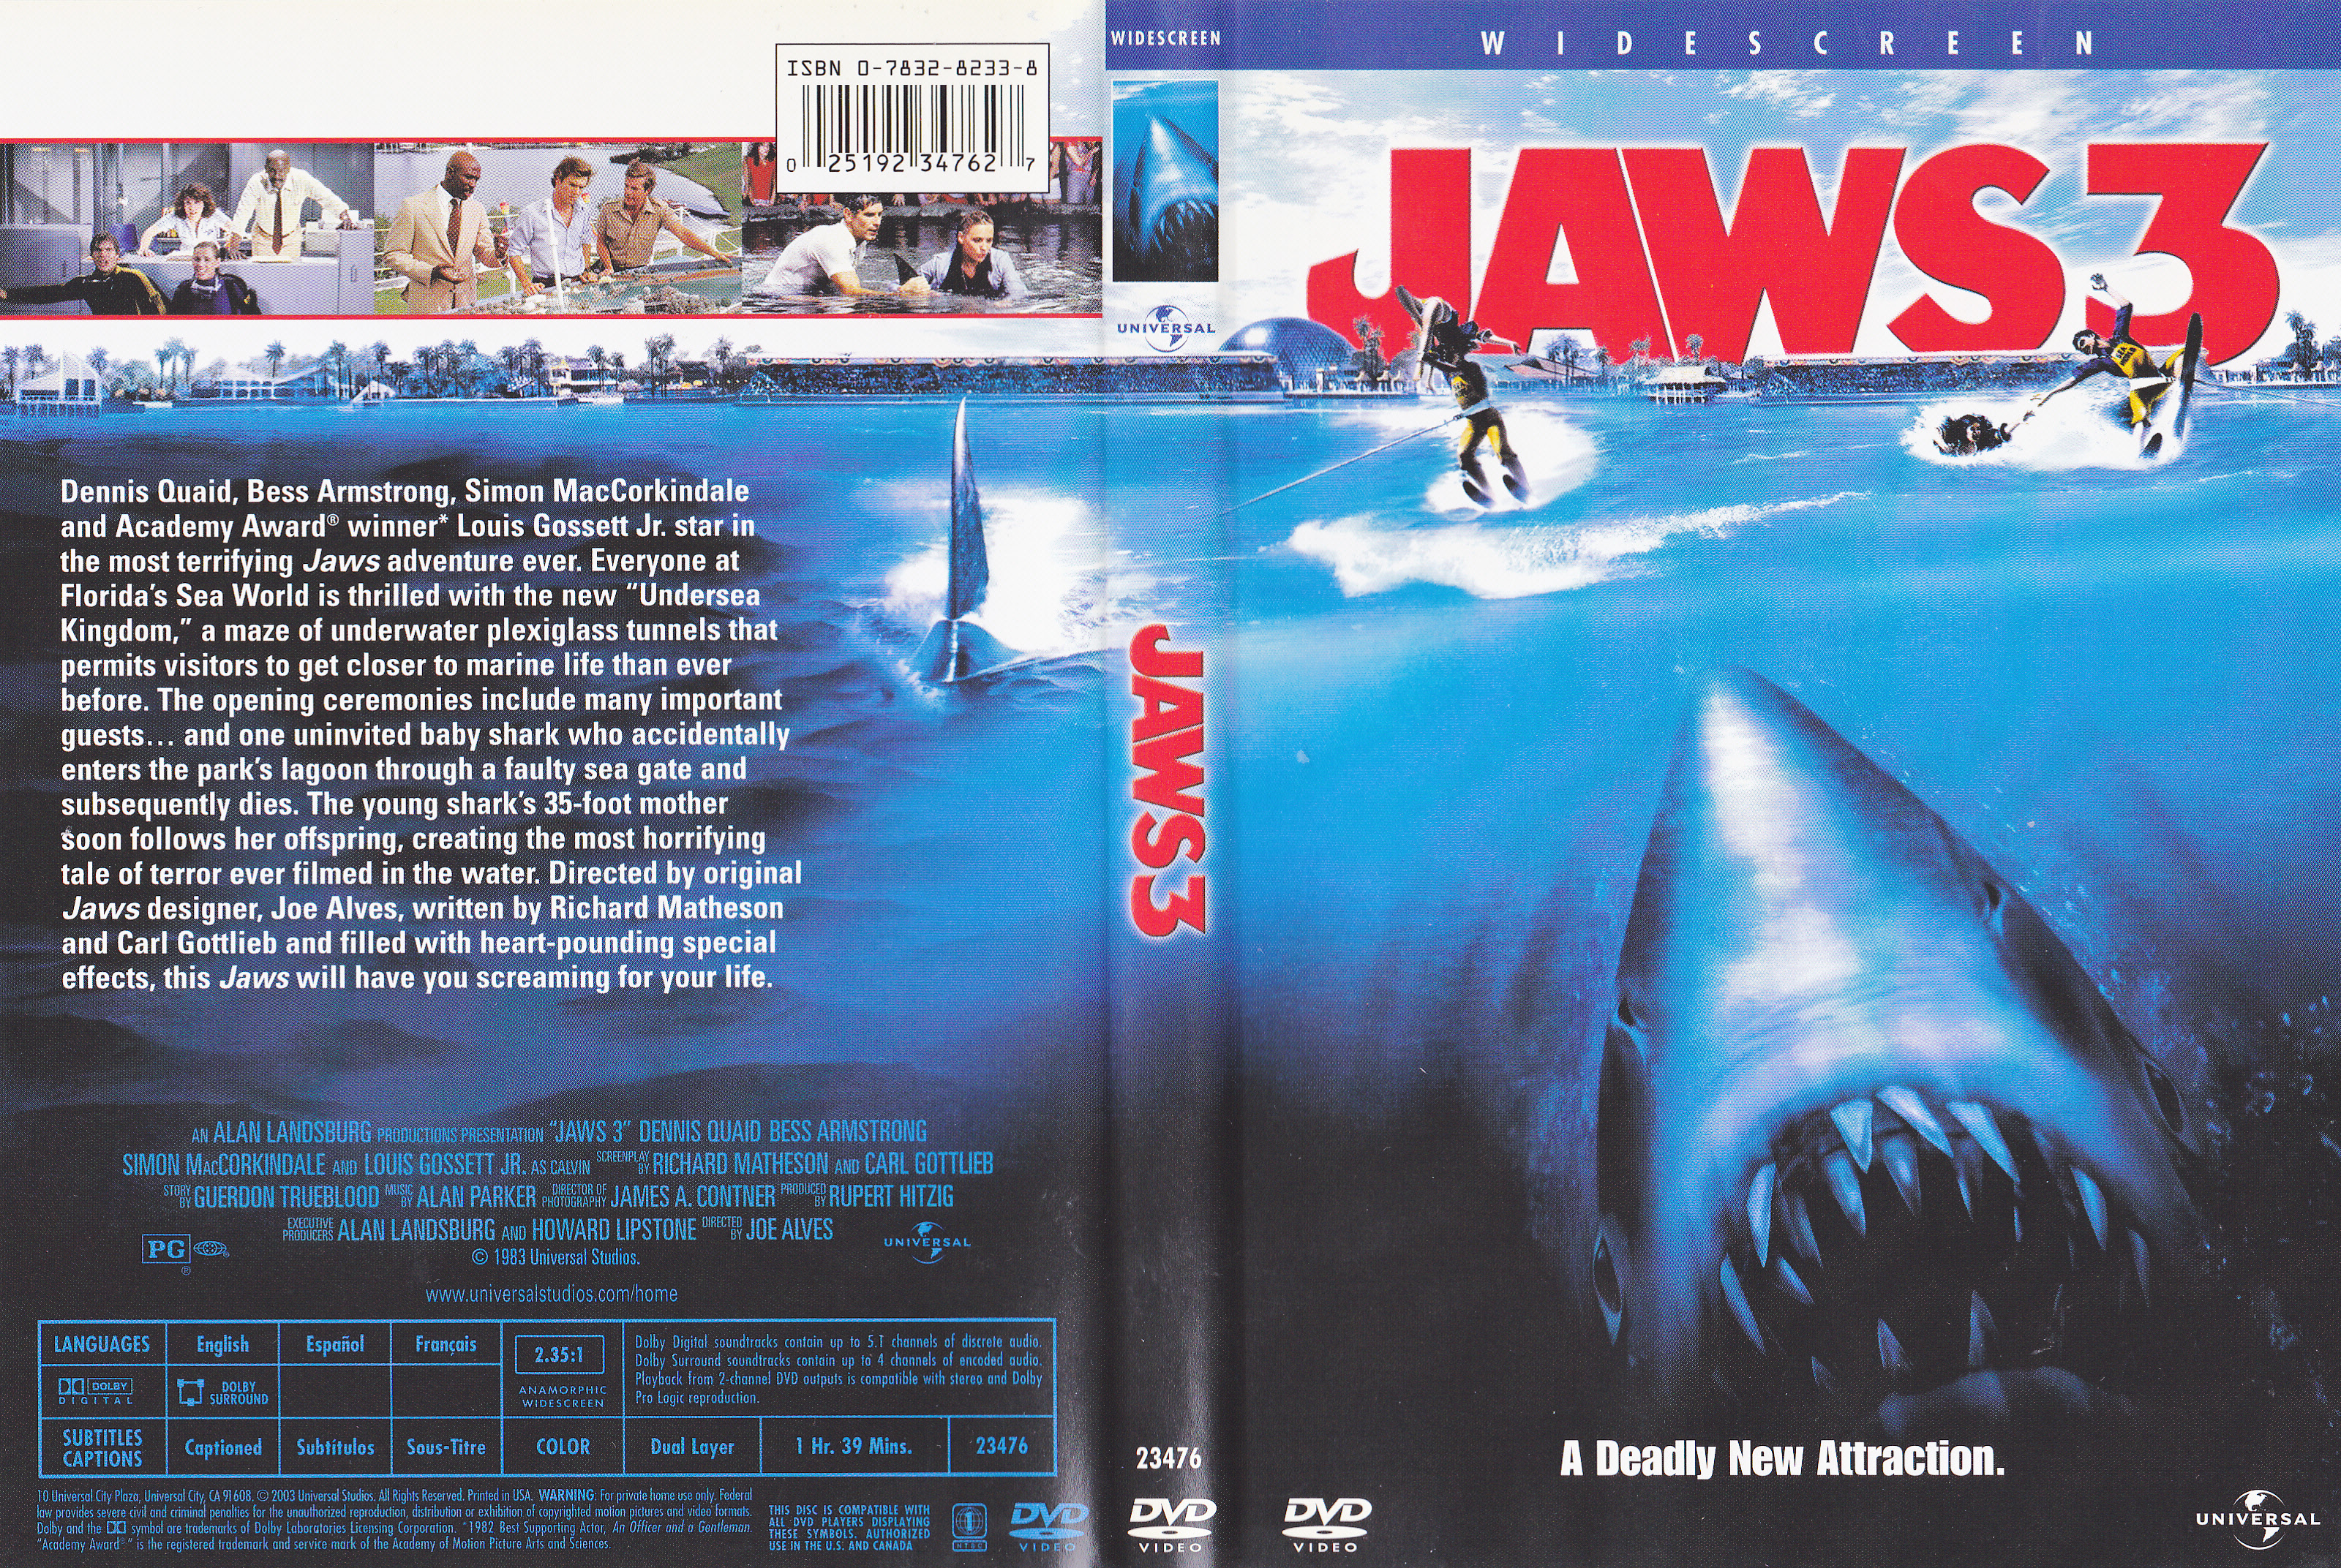 Jaquette DVD Jaws 3 (Canadienne)